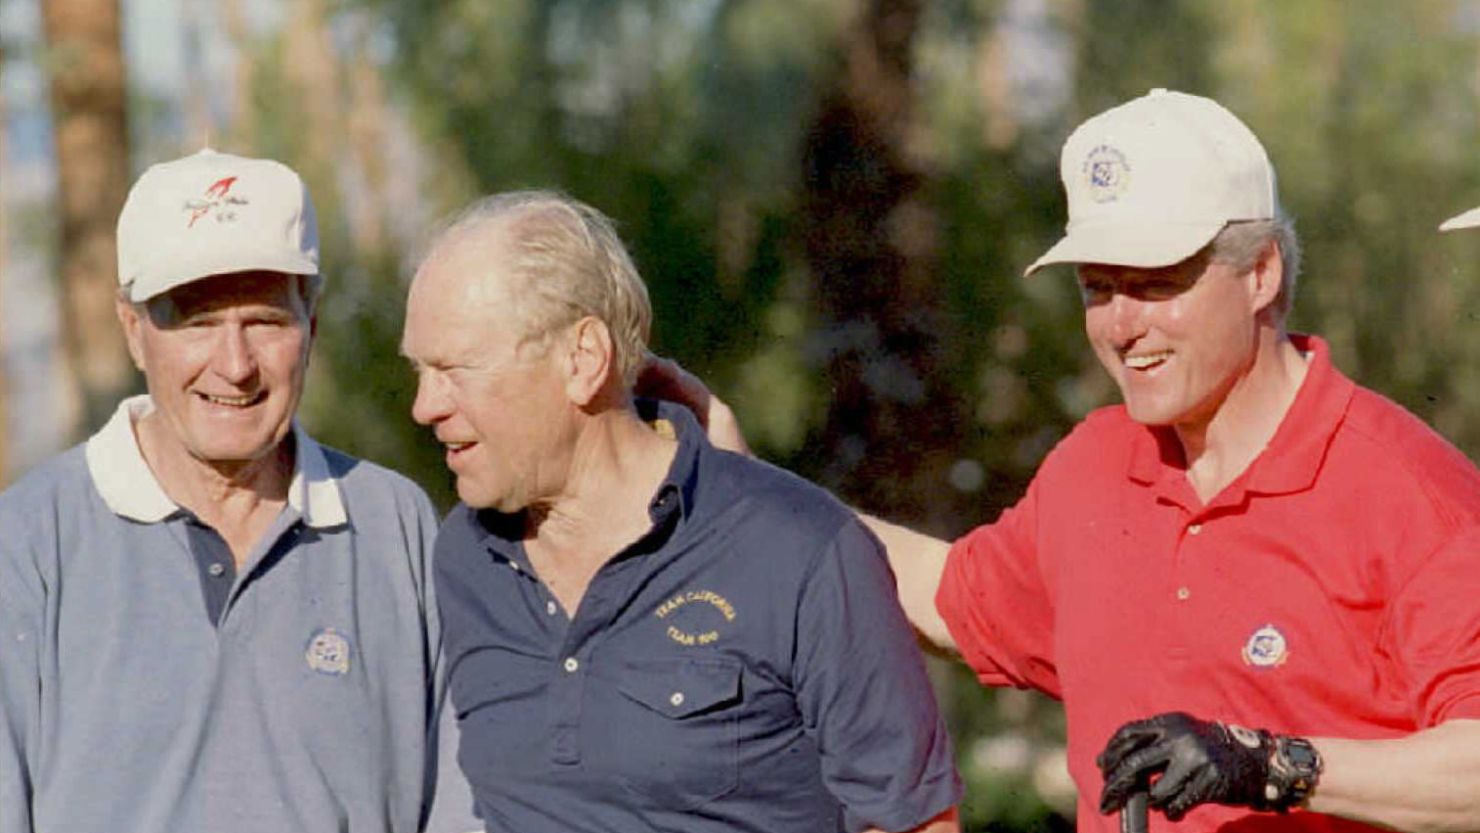 Gerald Ford, flanked by Yalies George H.W. Bush and Bill Clinton, was the only president from the Big Ten -- and he was never elected to the White House.